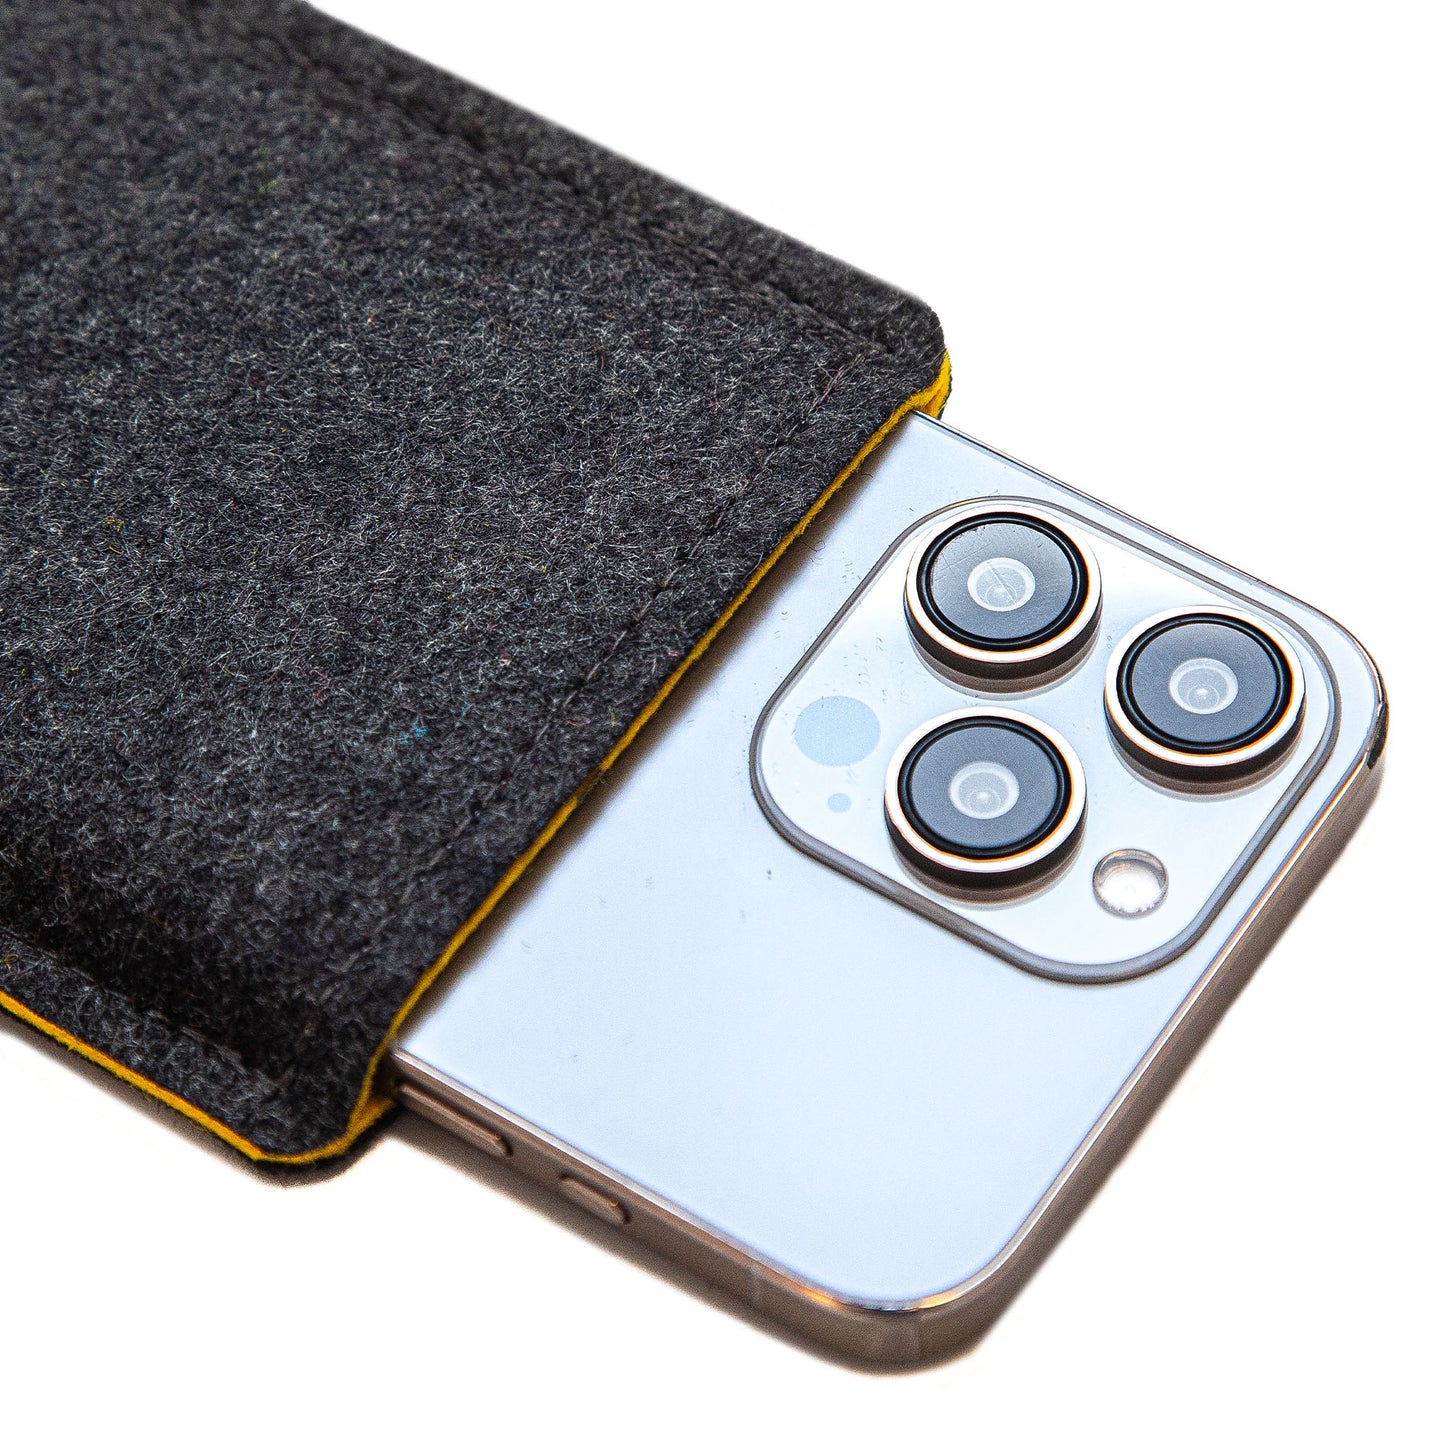 Premium Felt iPhone Sleeve with Card Pocket - Charcoal Gray & Yellow